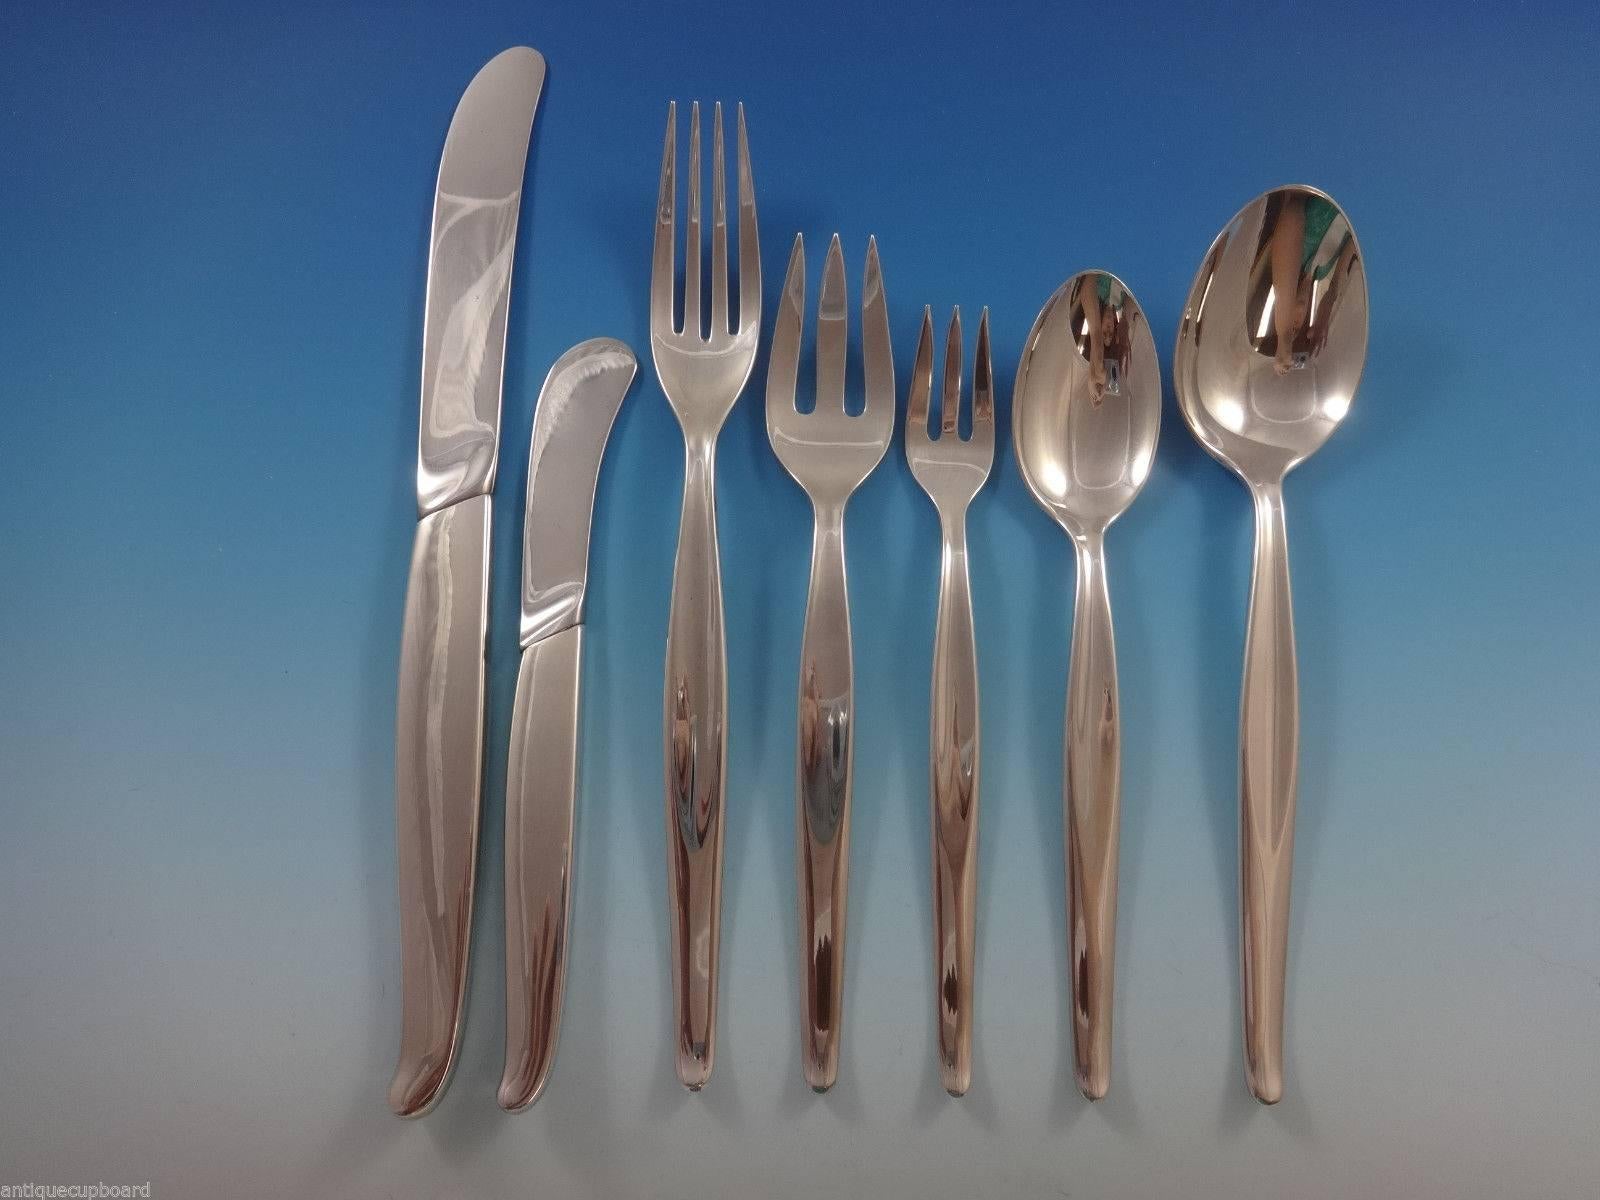 Stunning Contour by Towle sterling silver flatware set of 64 pieces. This set includes:

Eight knives, 8 3/4